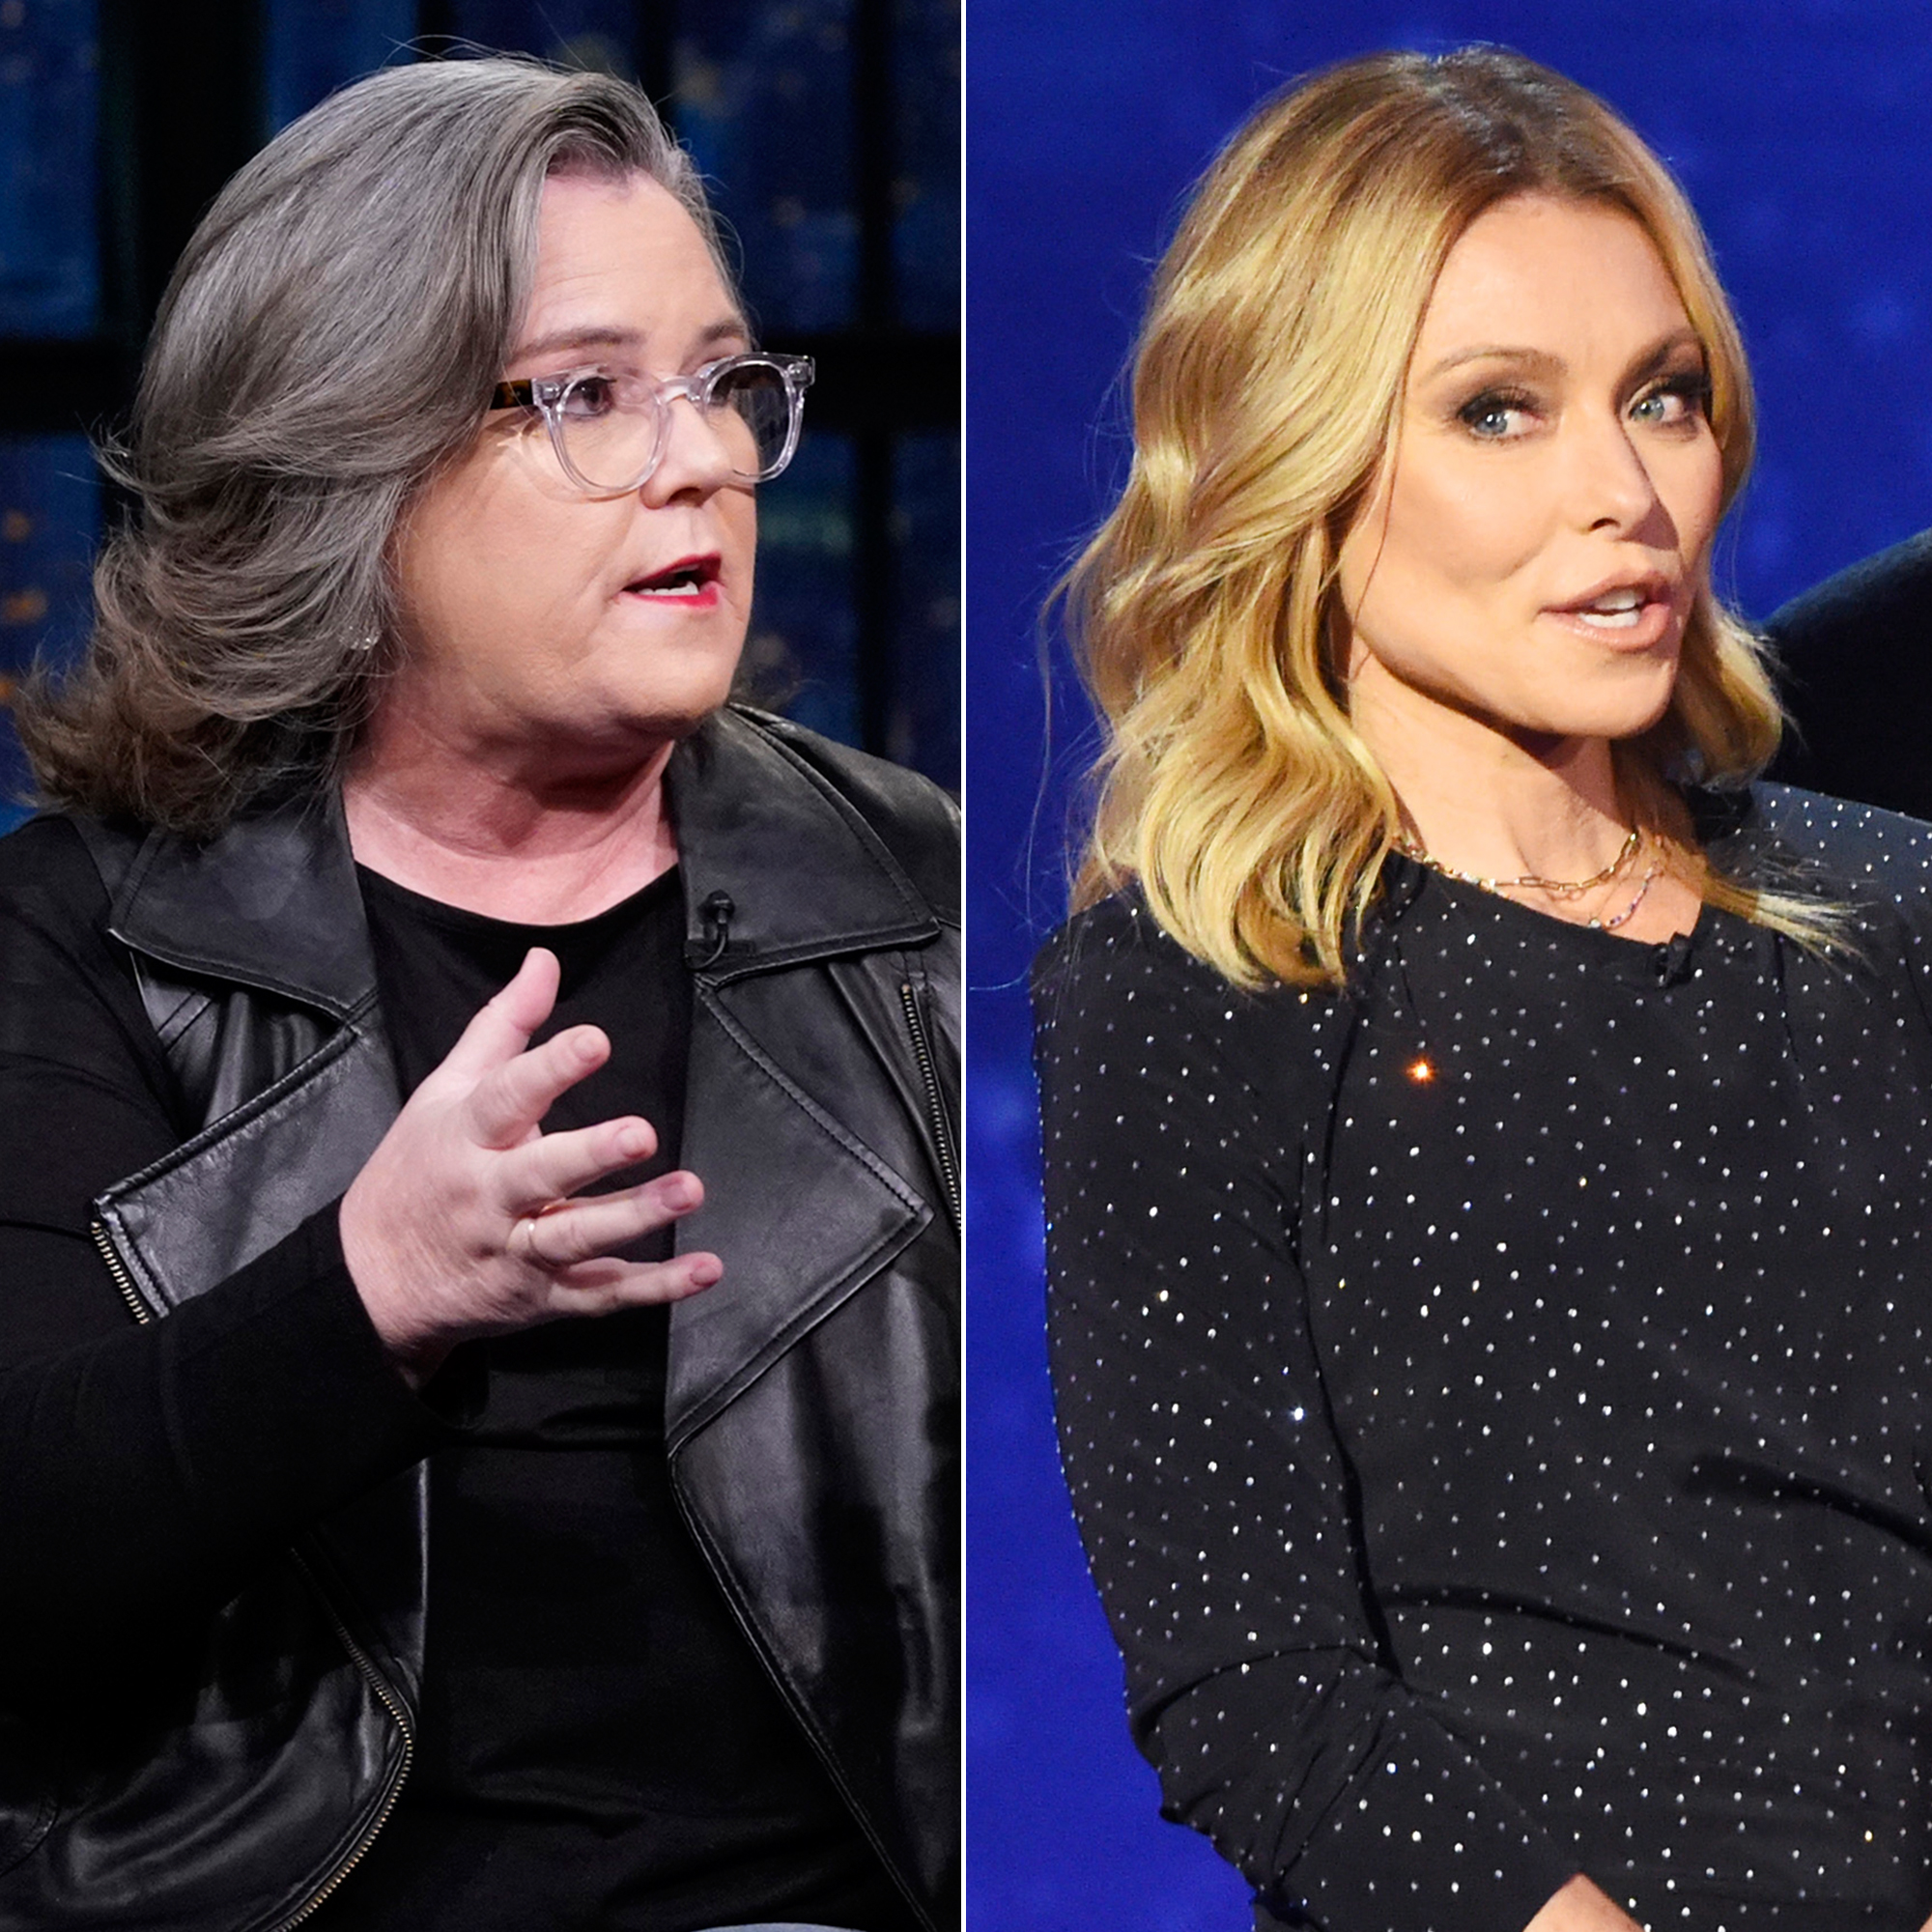 Rosie ODonnell Slams Mean Kelly Ripa, Details Clay Aiken Drama picture image image